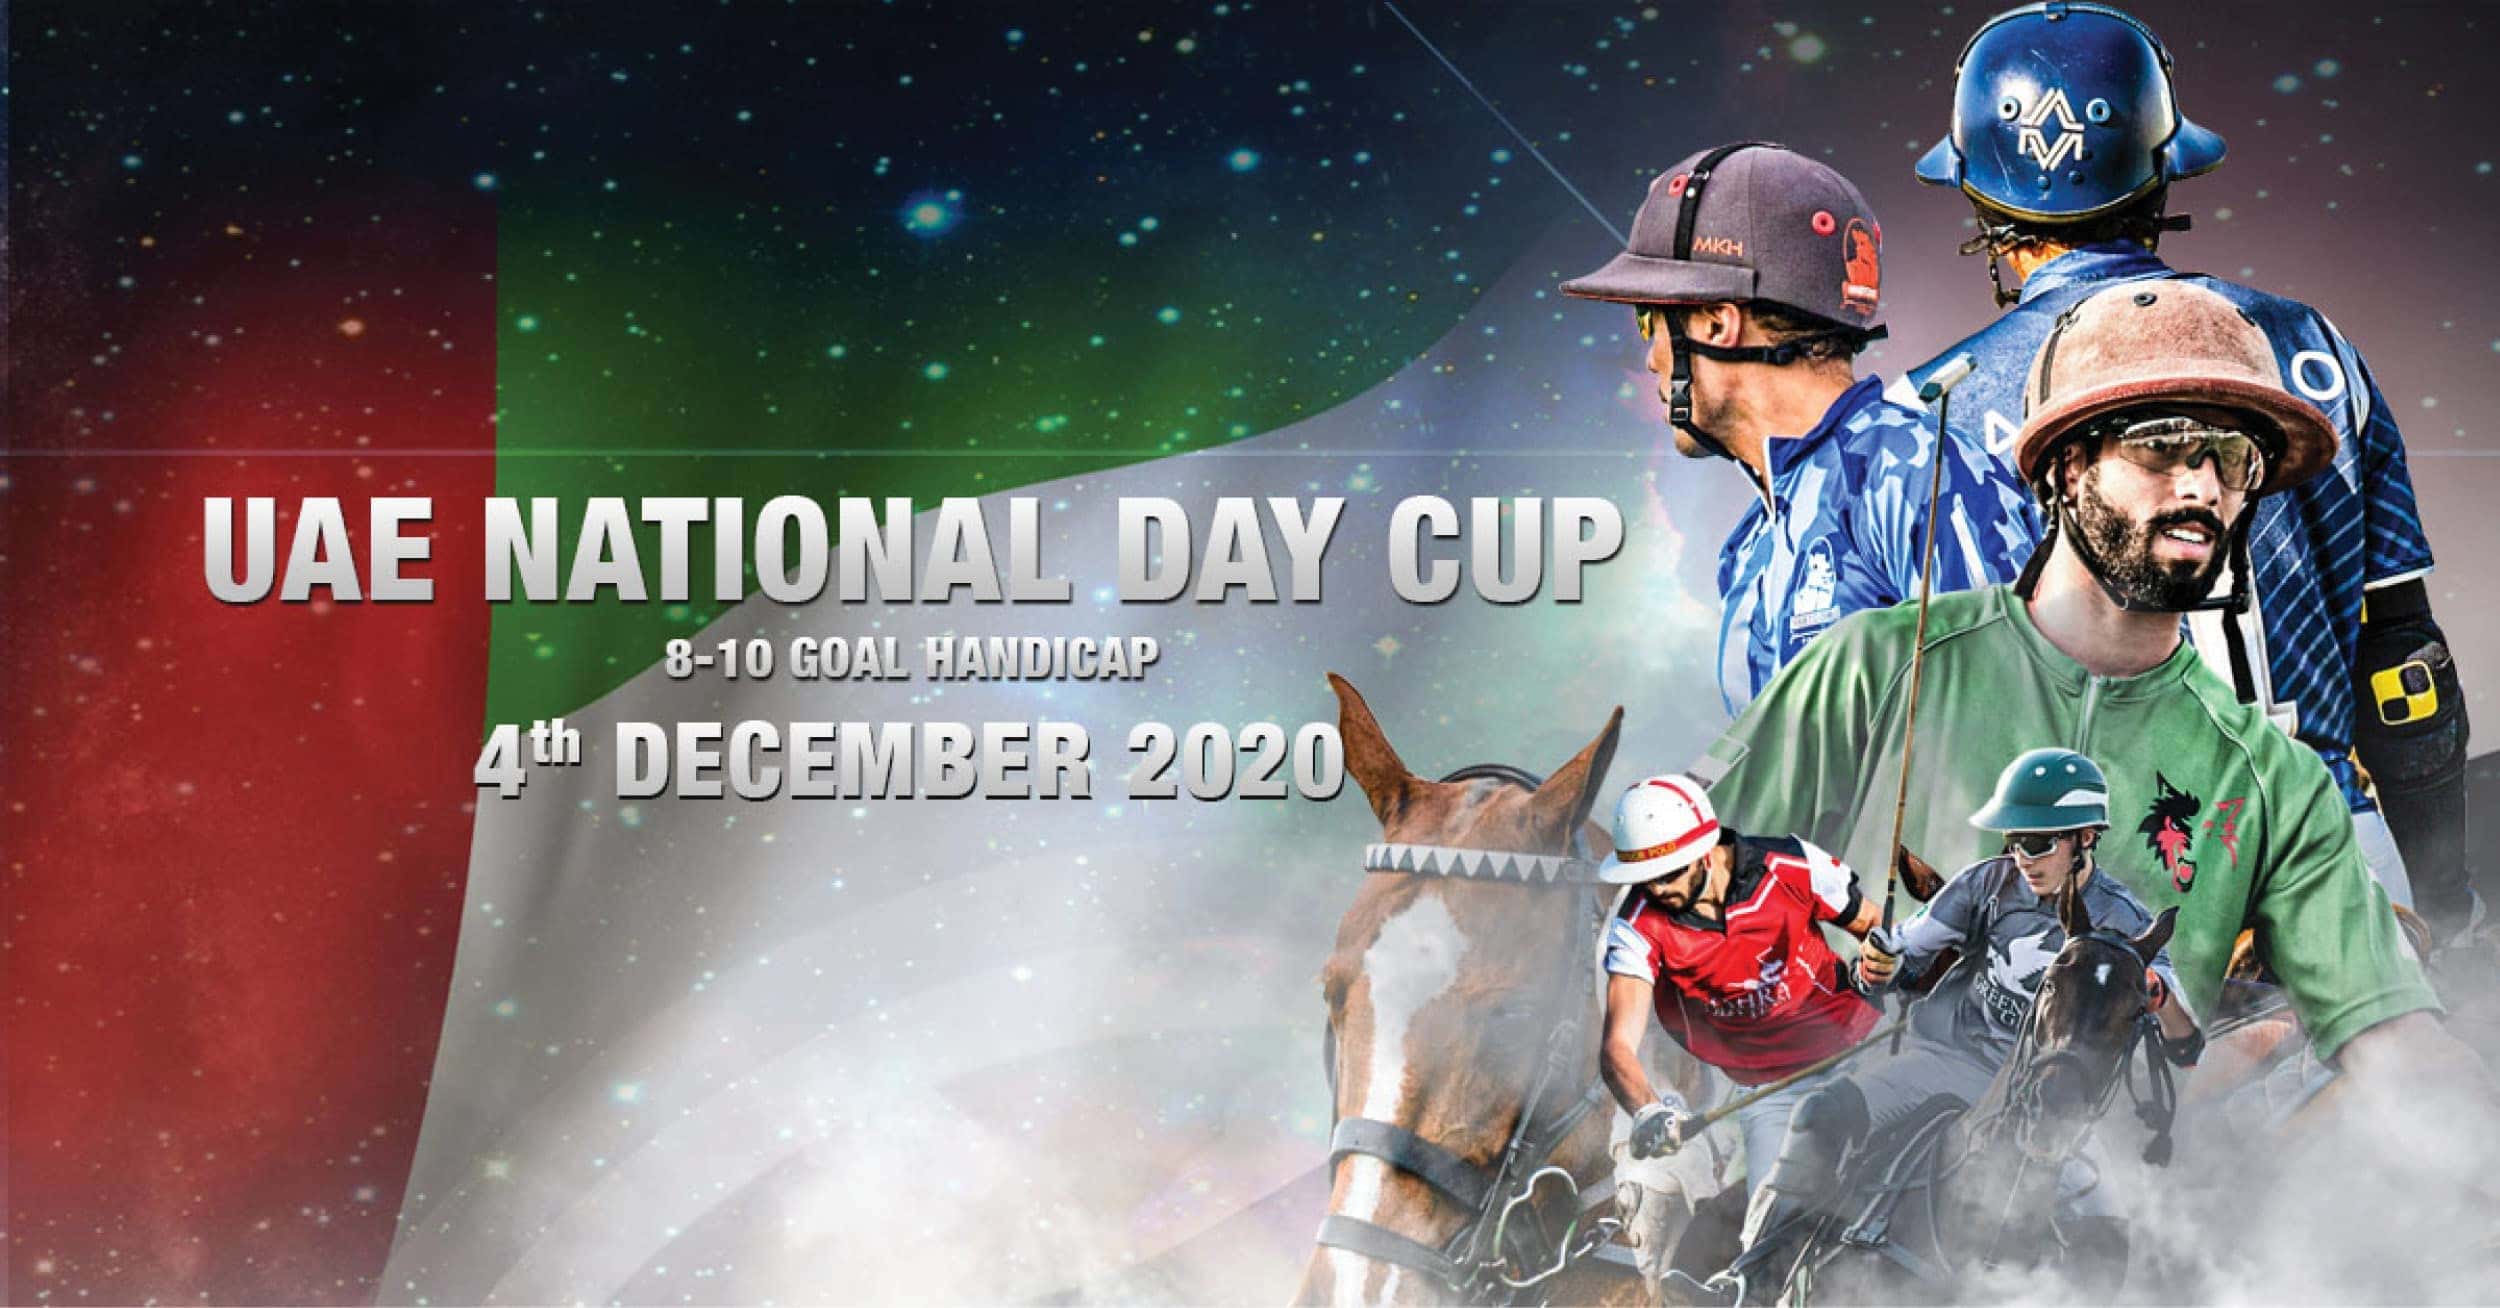 UAE National Day Cup 2020